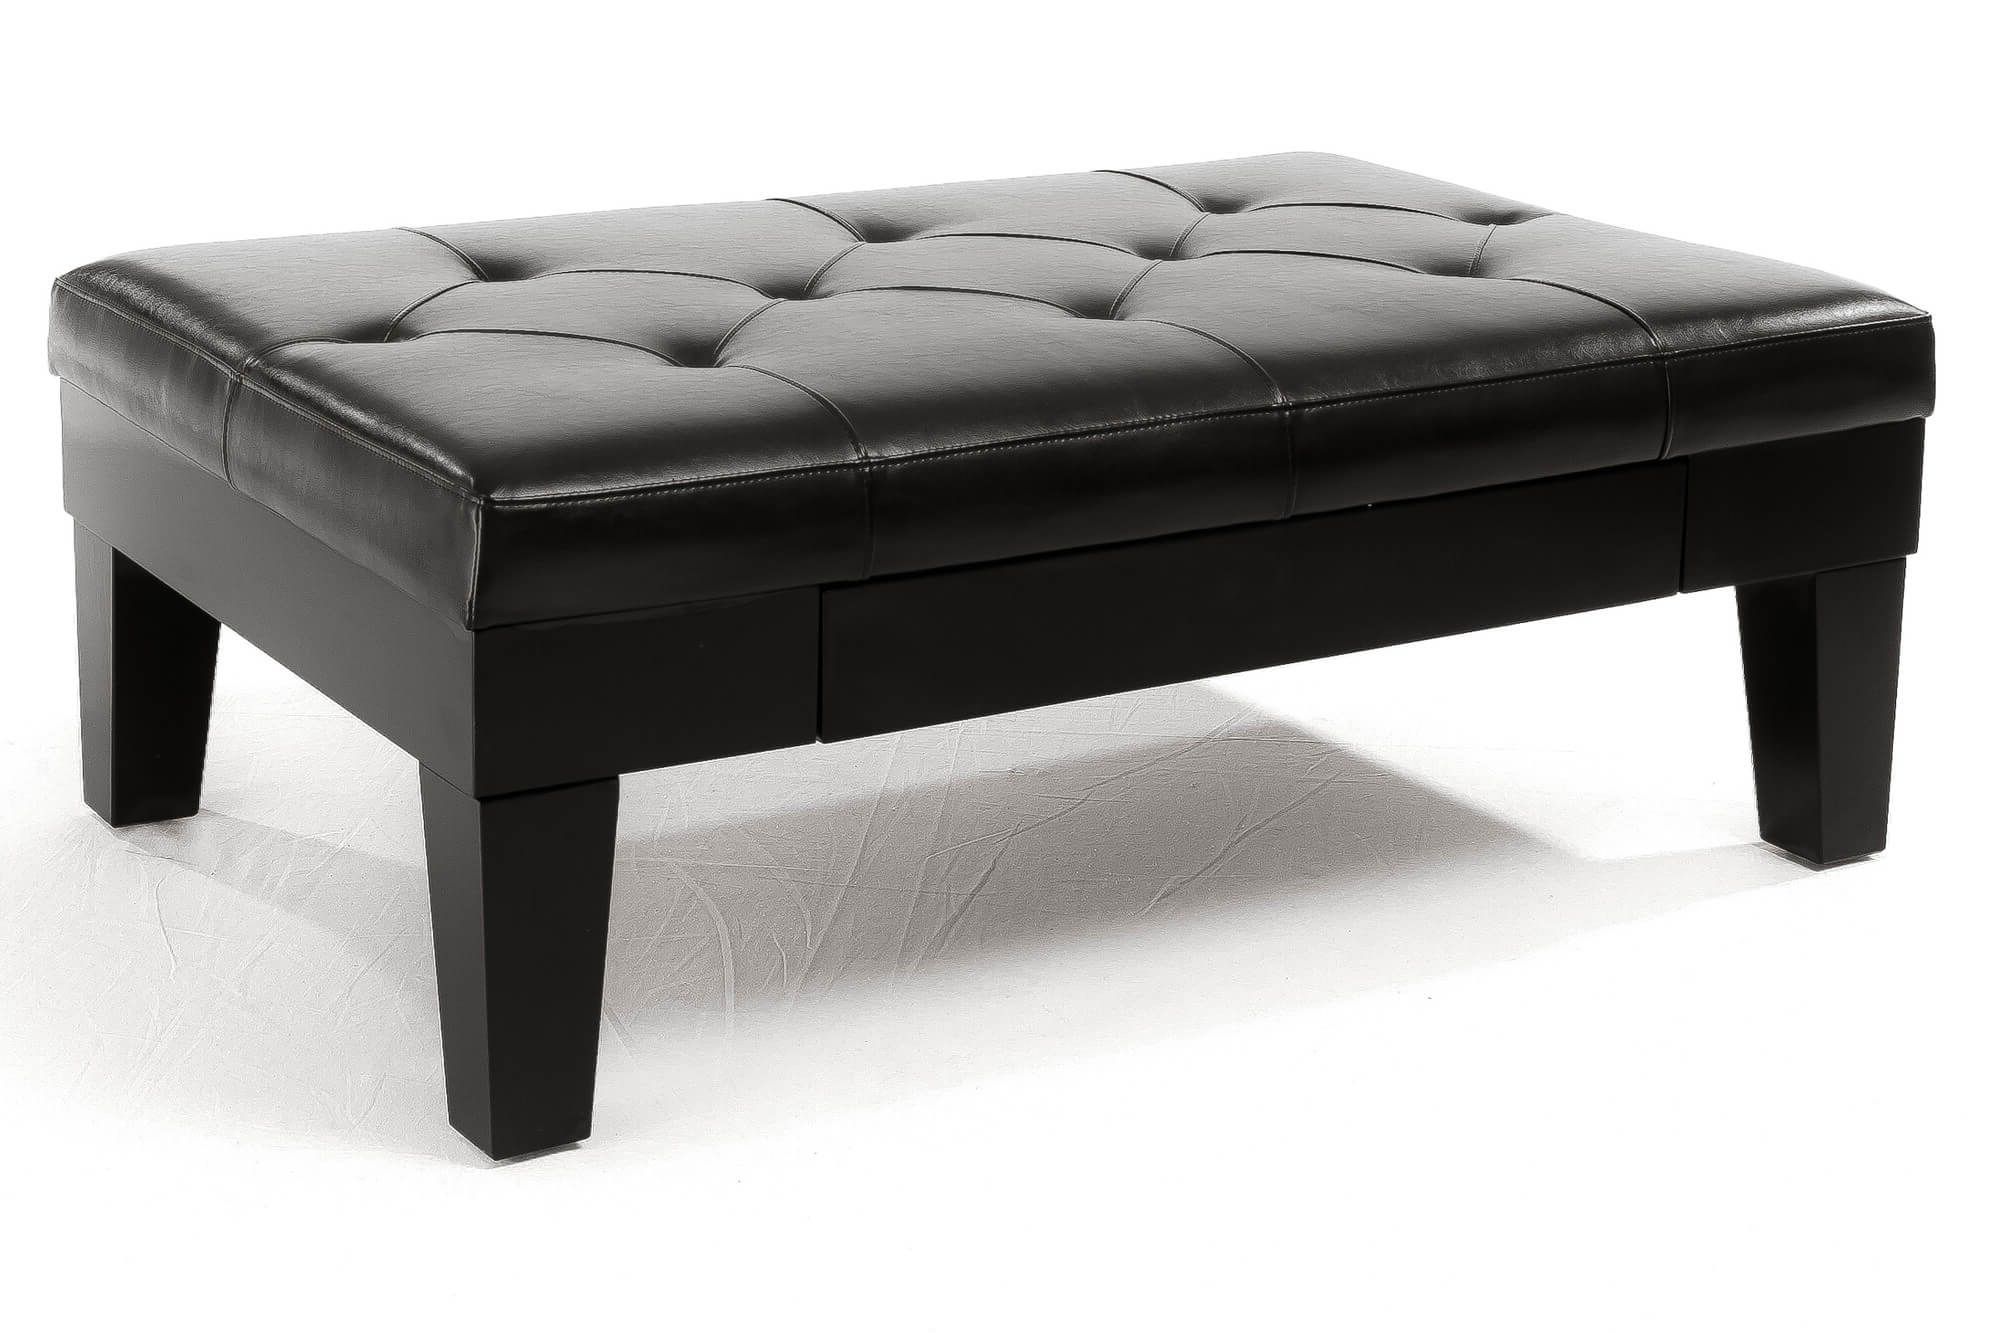 Popular 36 Top Brown Leather Ottoman Coffee Tables For Button Tufted Coffee Tables (View 9 of 20)